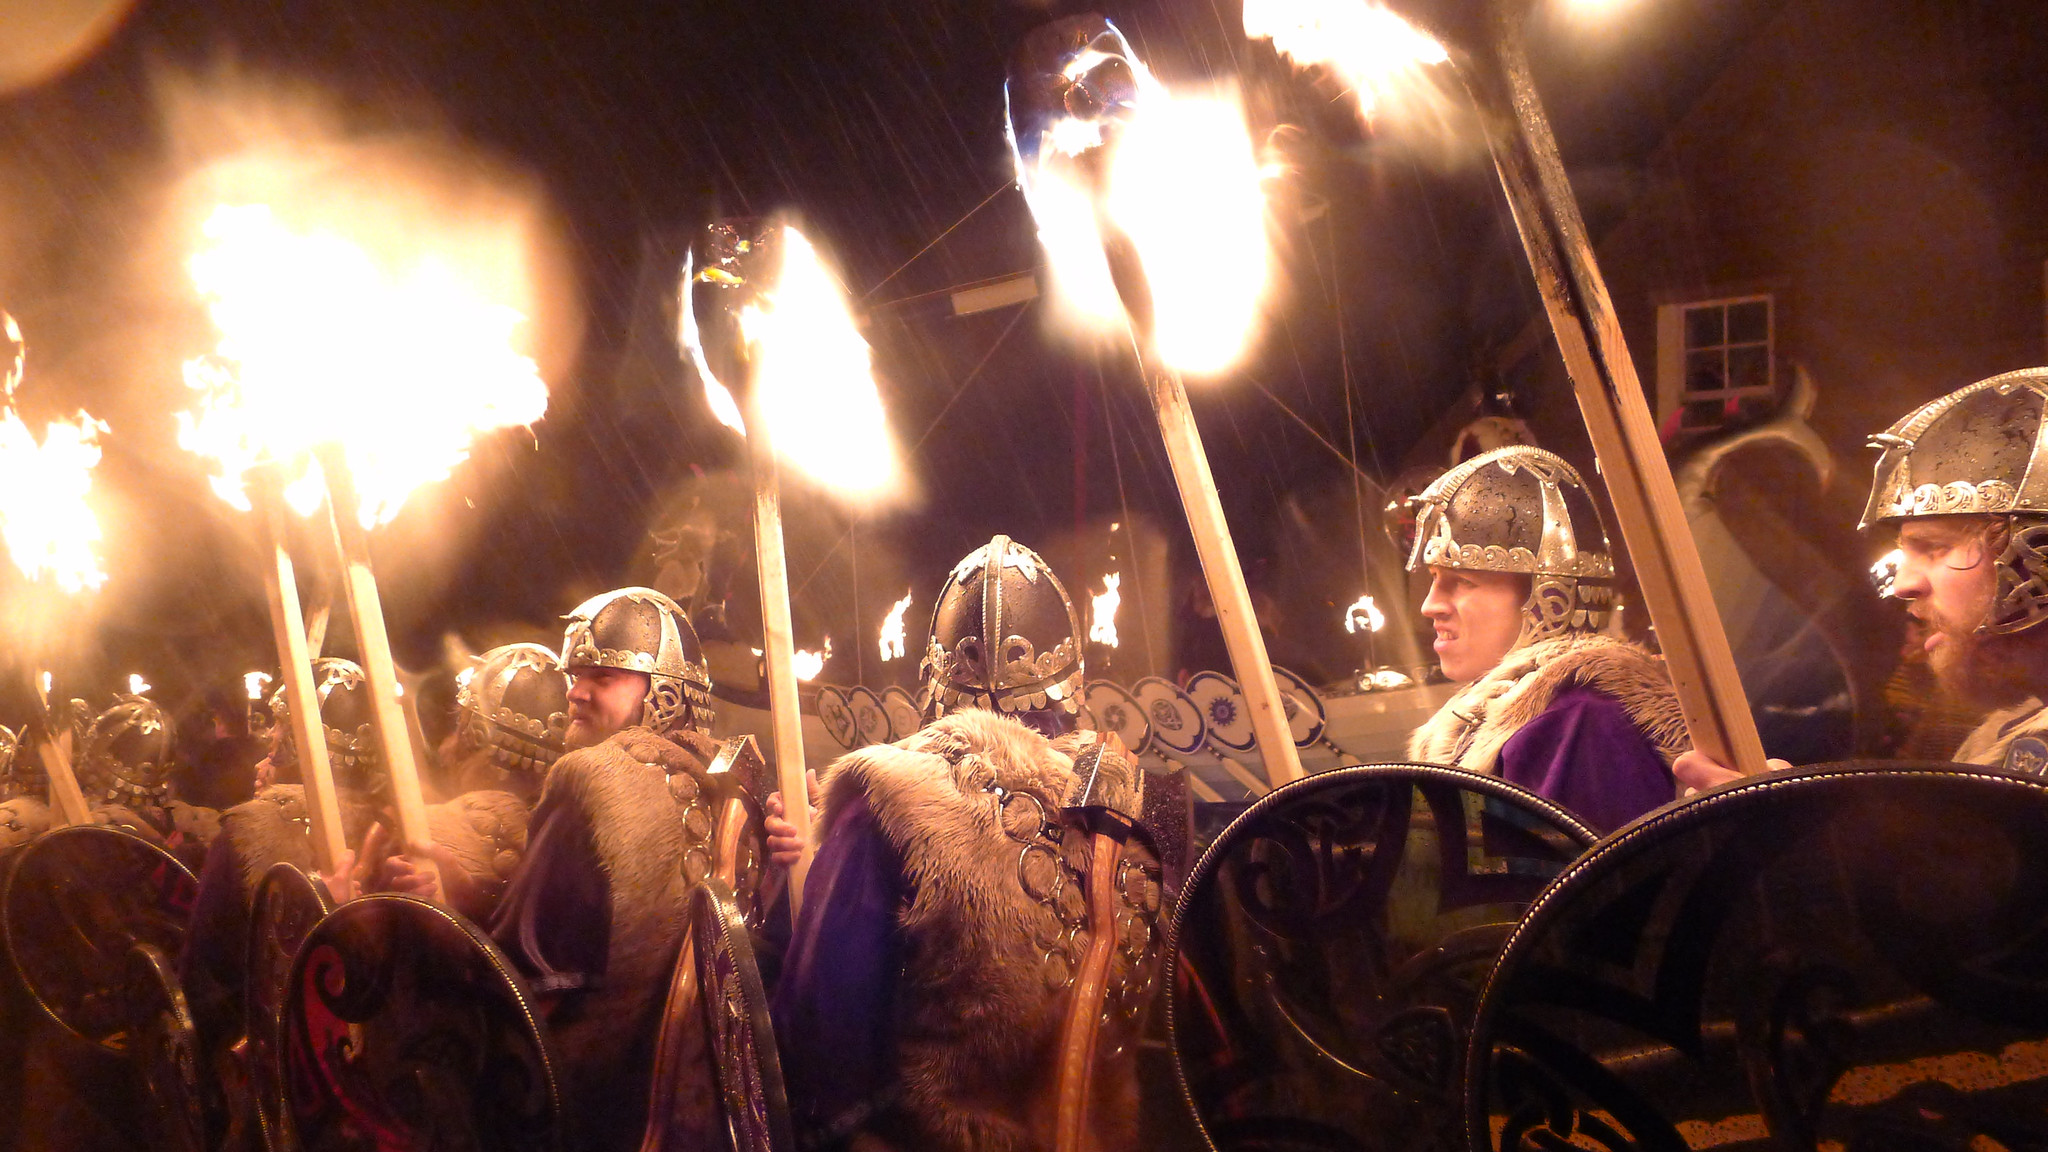 A group of men dressed as vikings lead a procession